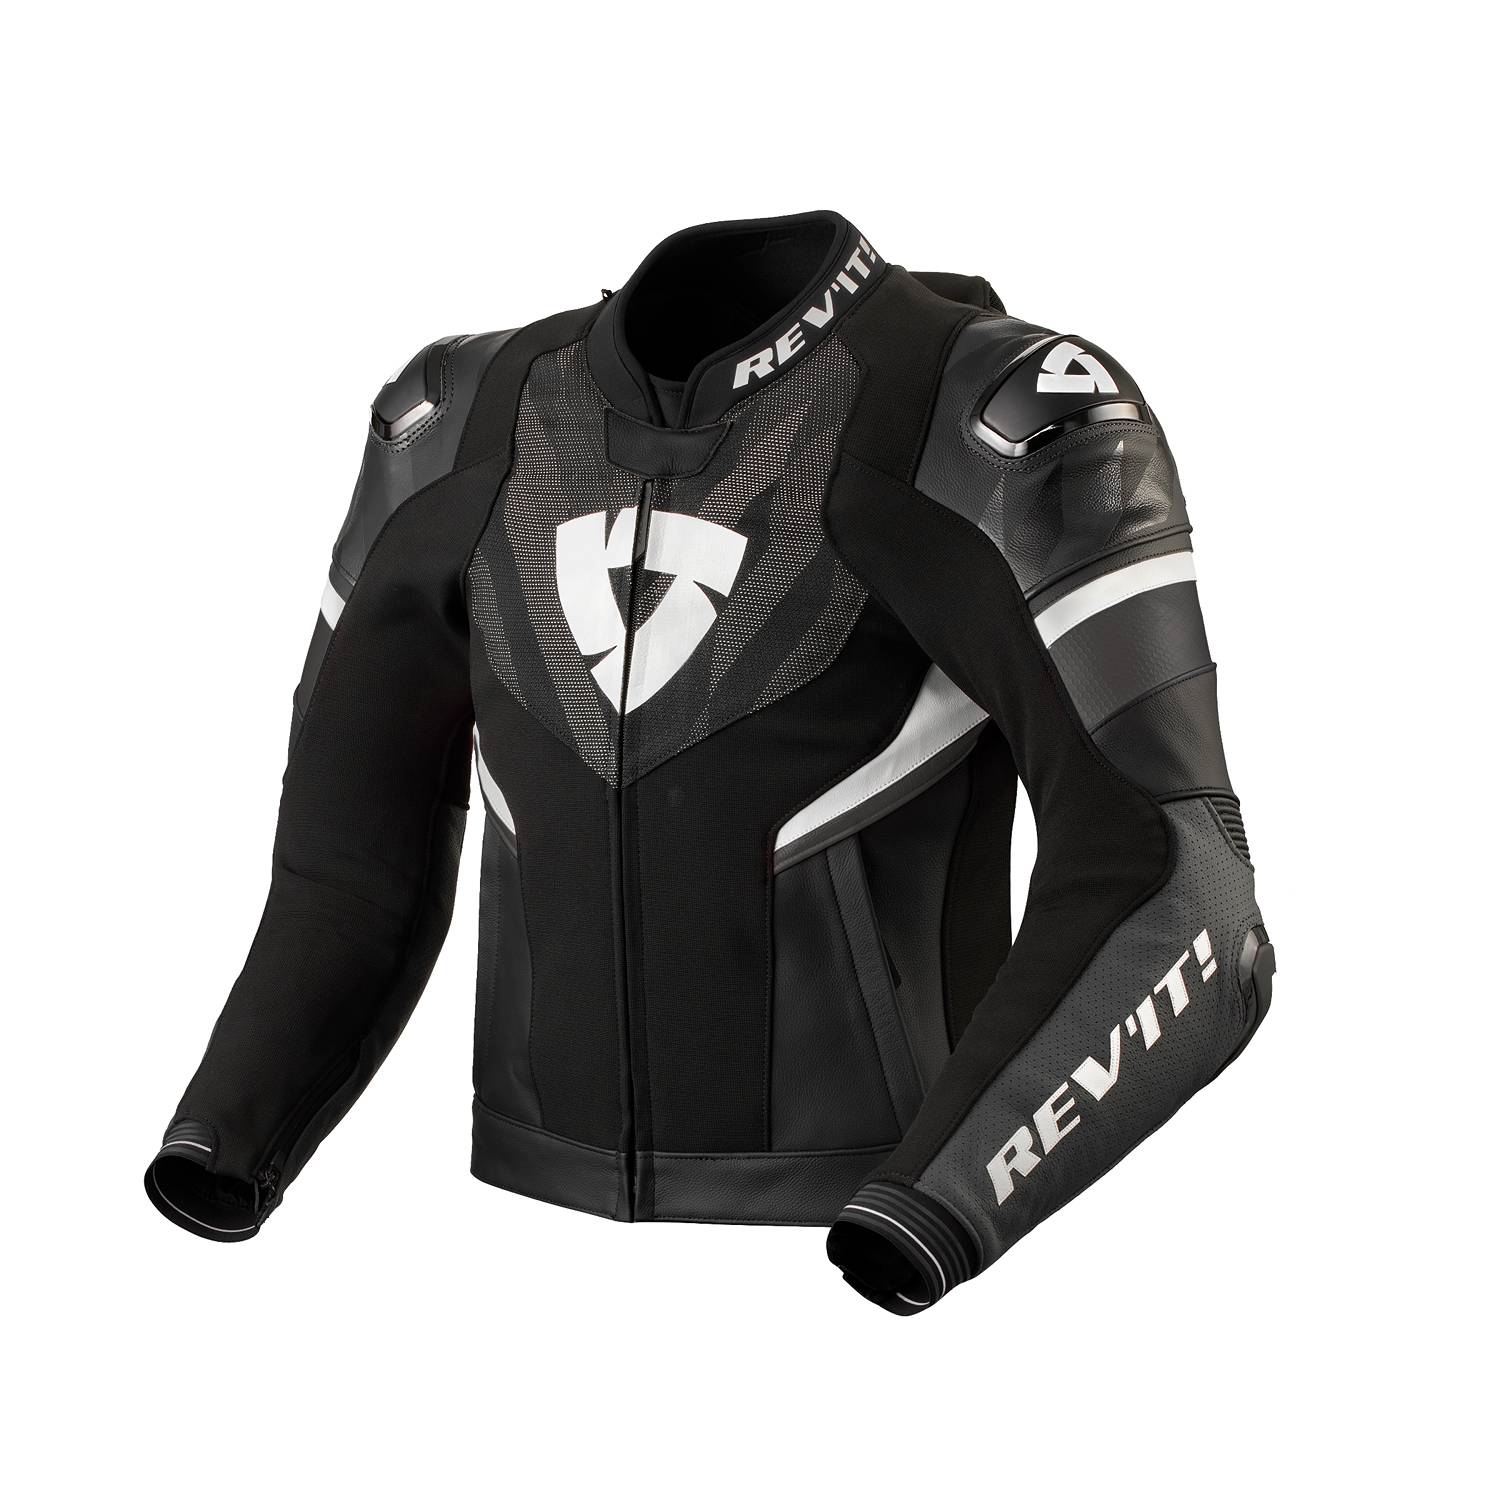 Image of REV'IT! Hyperspeed 2 Pro Jacket Black Anthracite Size 48 ID 8700001358590